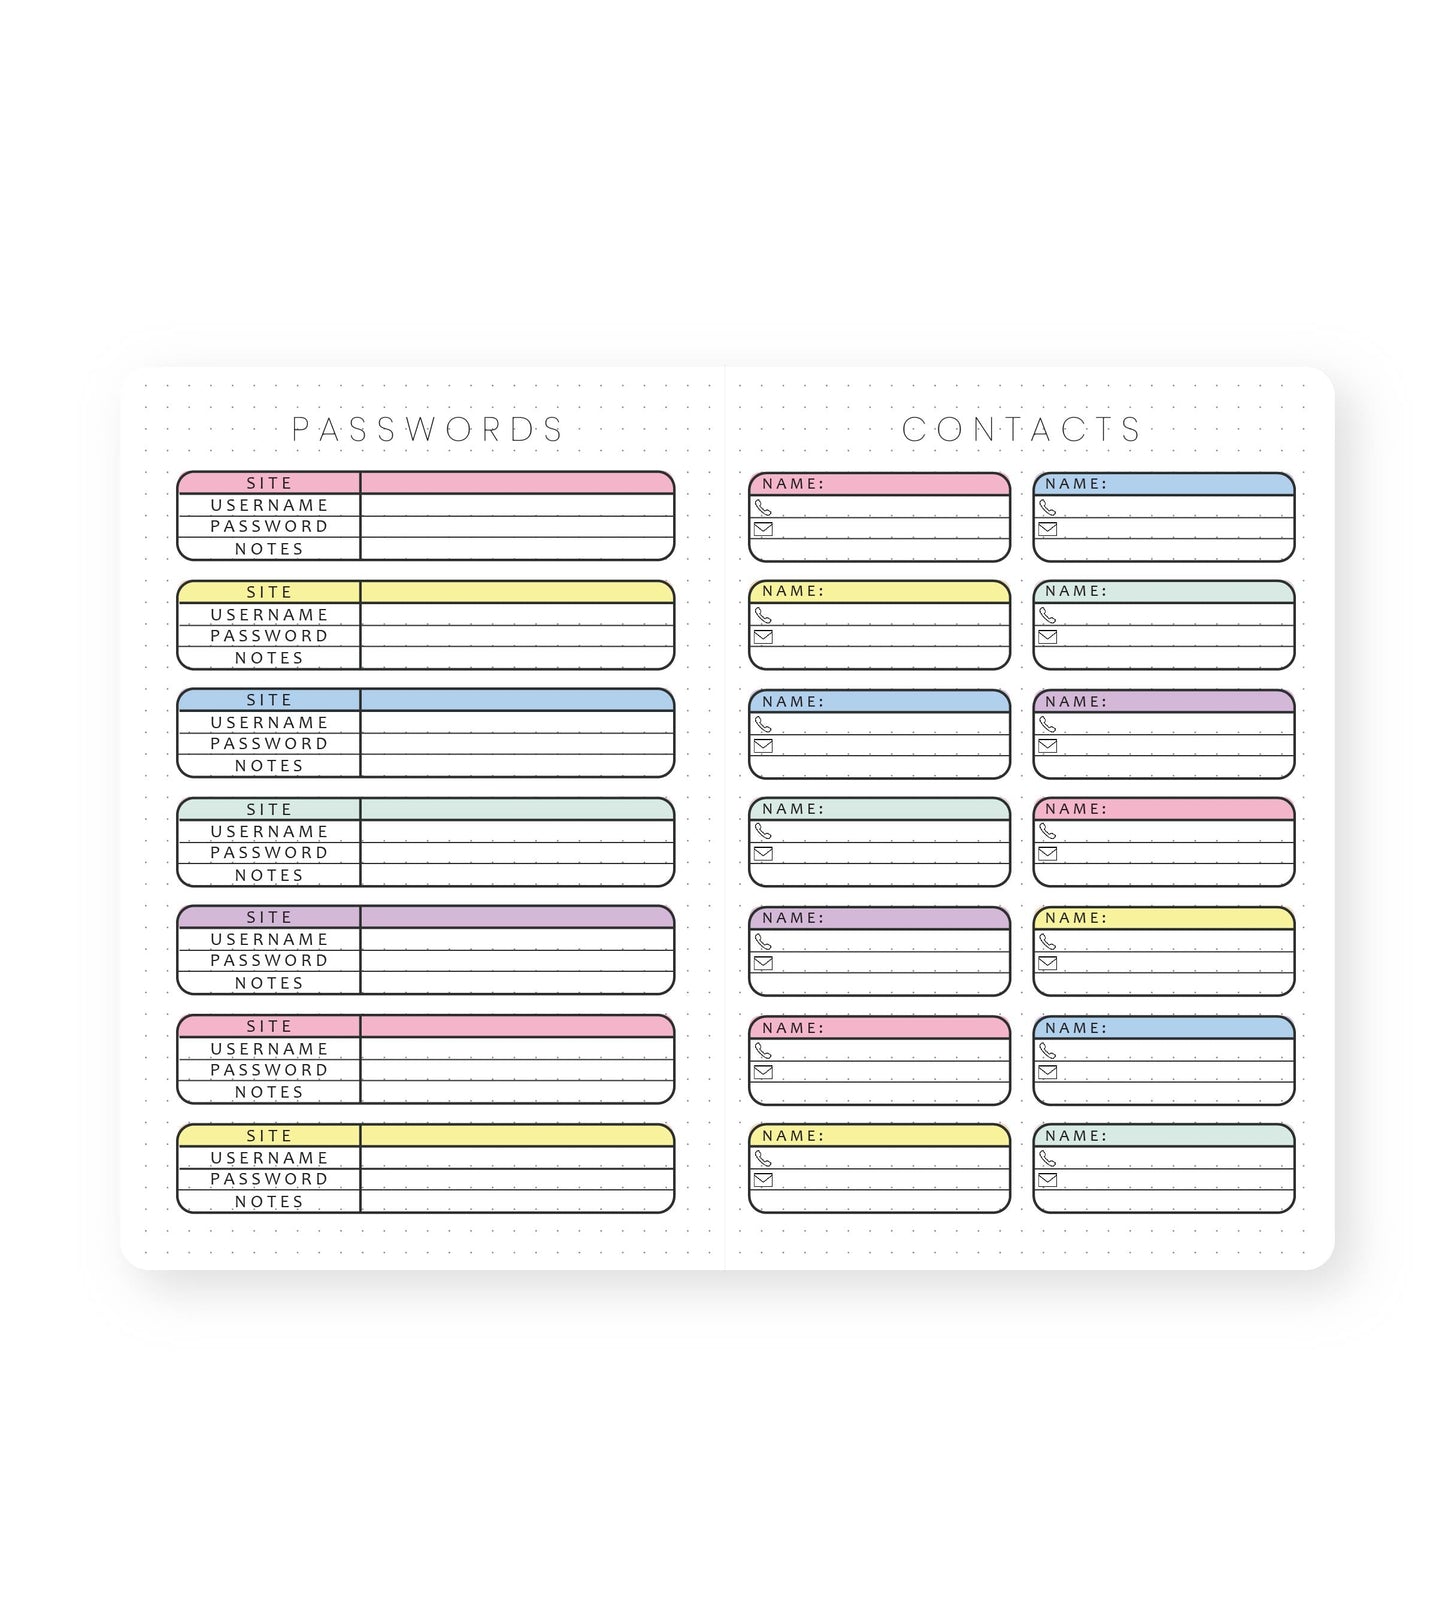 2024-25 Personalized Illustrated Planner Aubergine